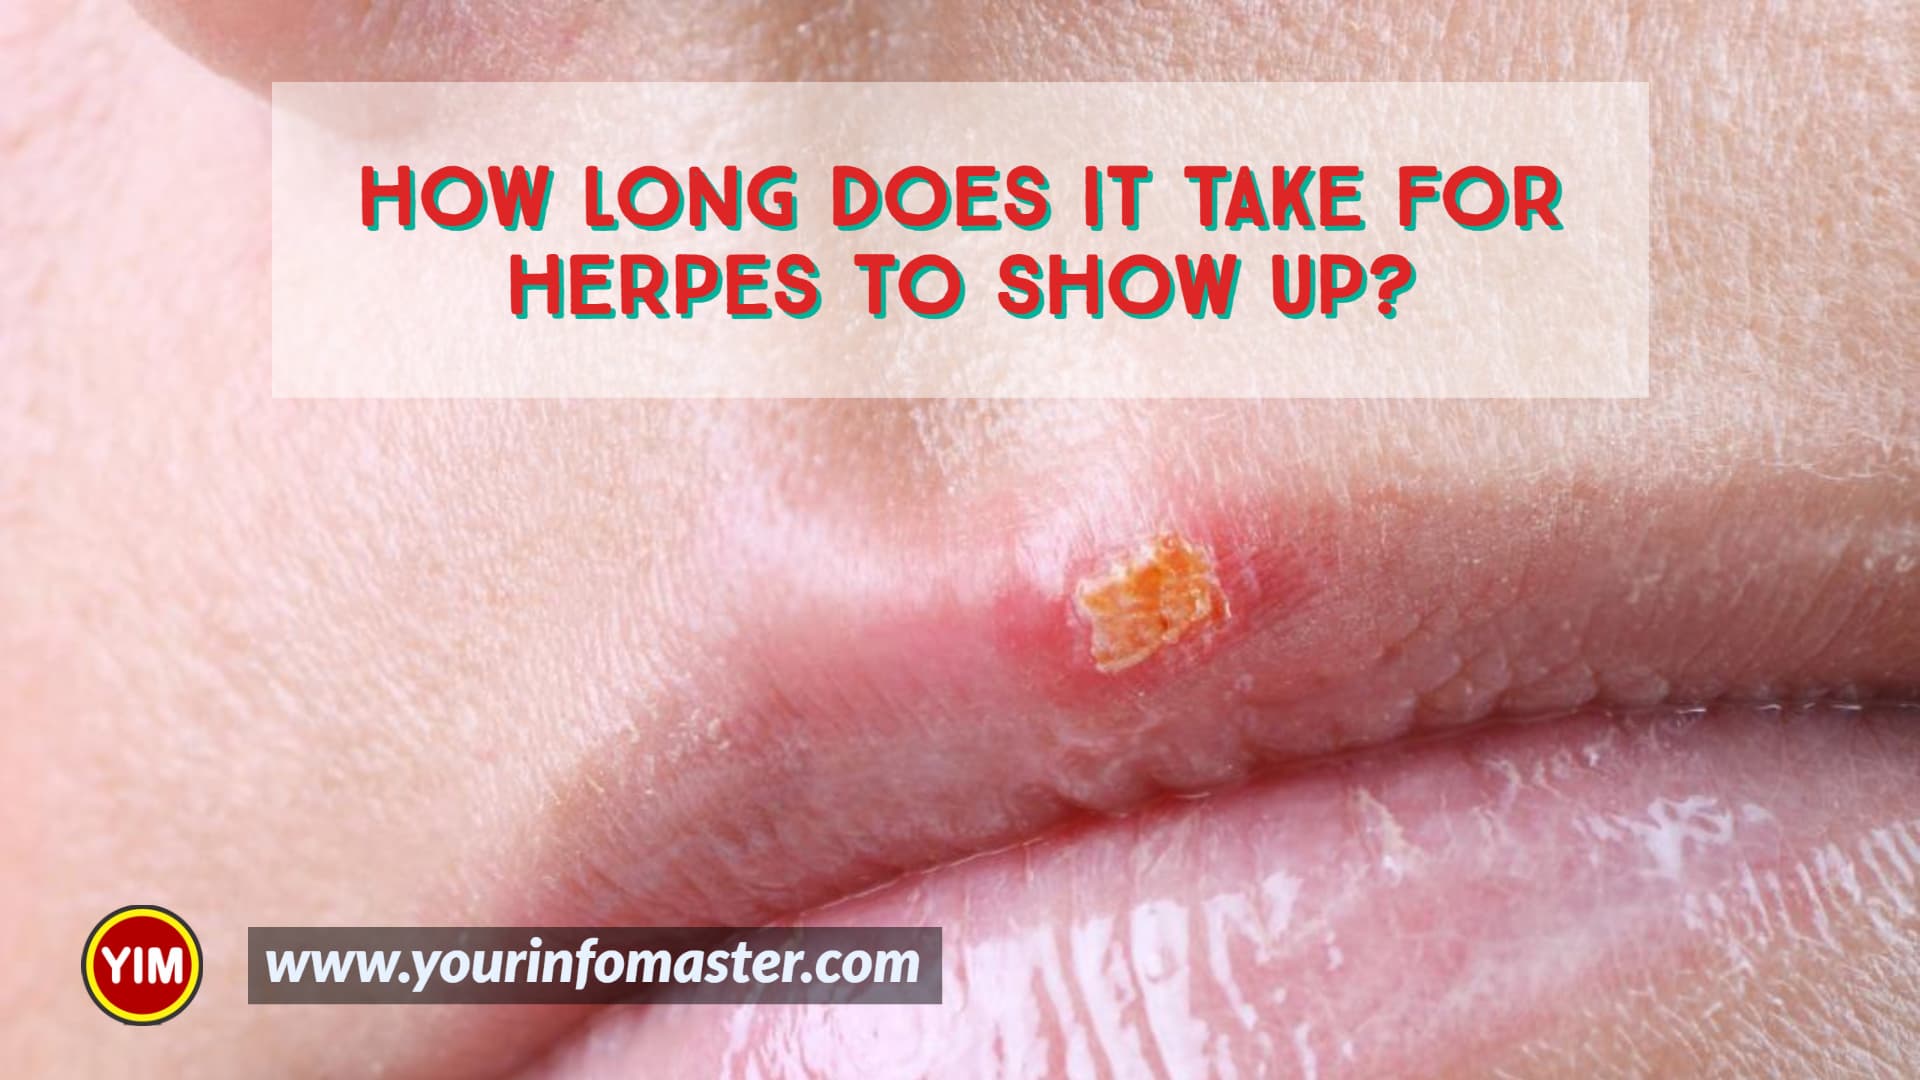 Can you have herpes and not know, Herpes incubation periods, How Long Does it Take for Herpes to Show up, How long does it take for symptoms of herpes to appear, How soon can you be tested, How to prevent the spread of herpes, Type of tests used to diagnose herpes